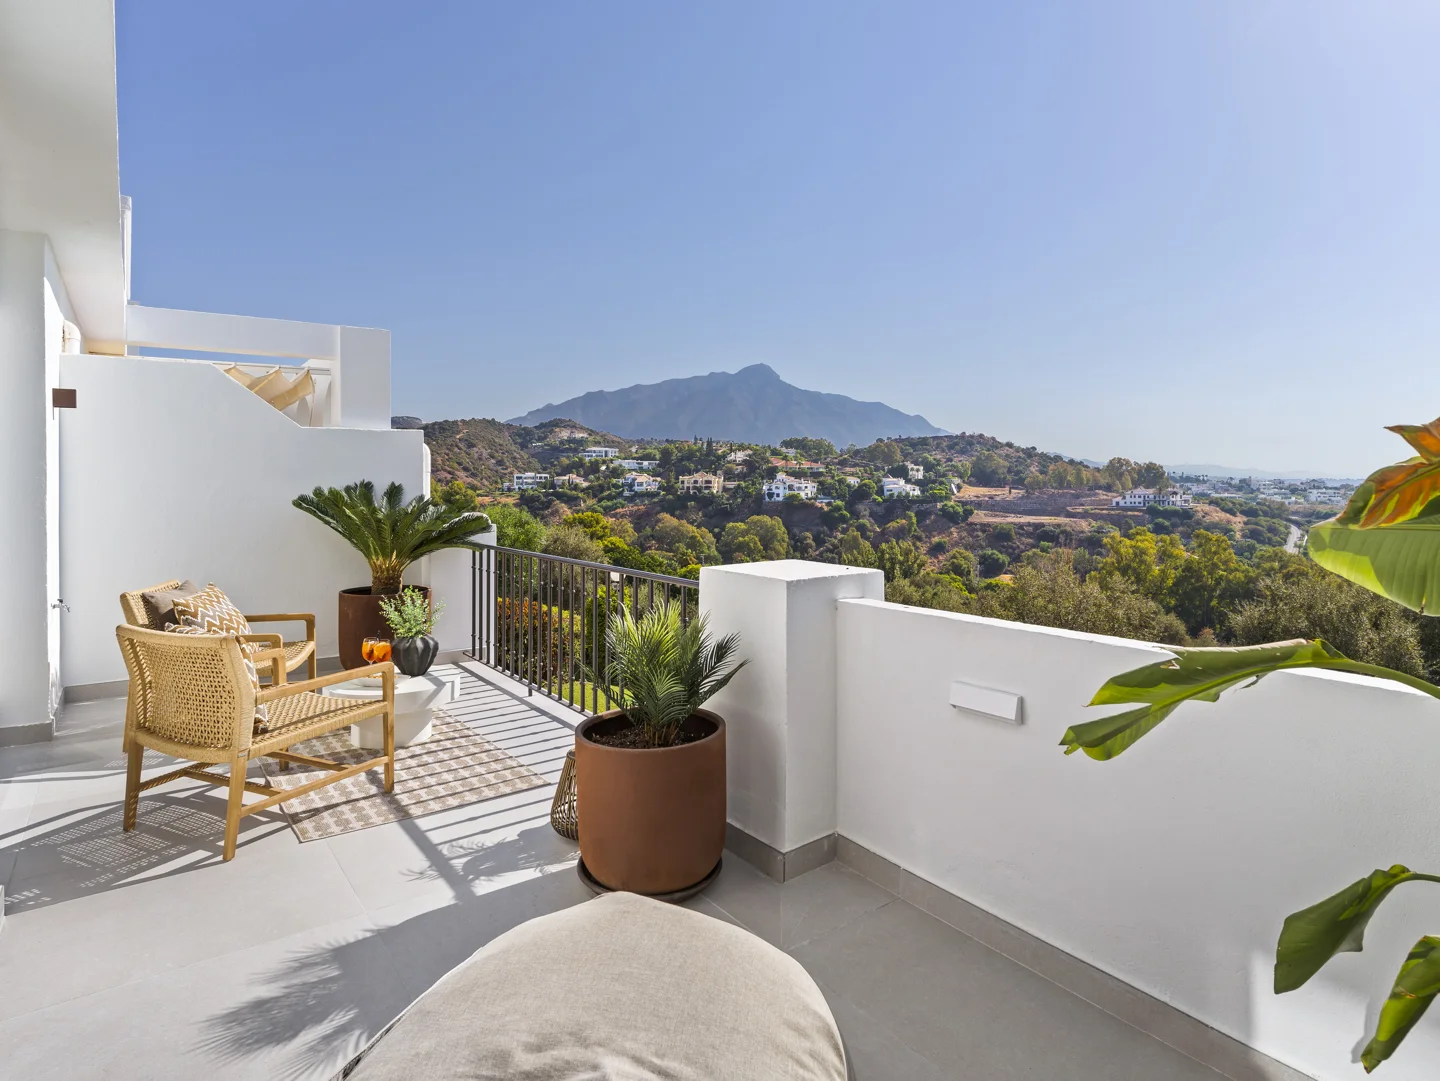 La Quinta: Refurbished townhouse with unparalleled views of the coast